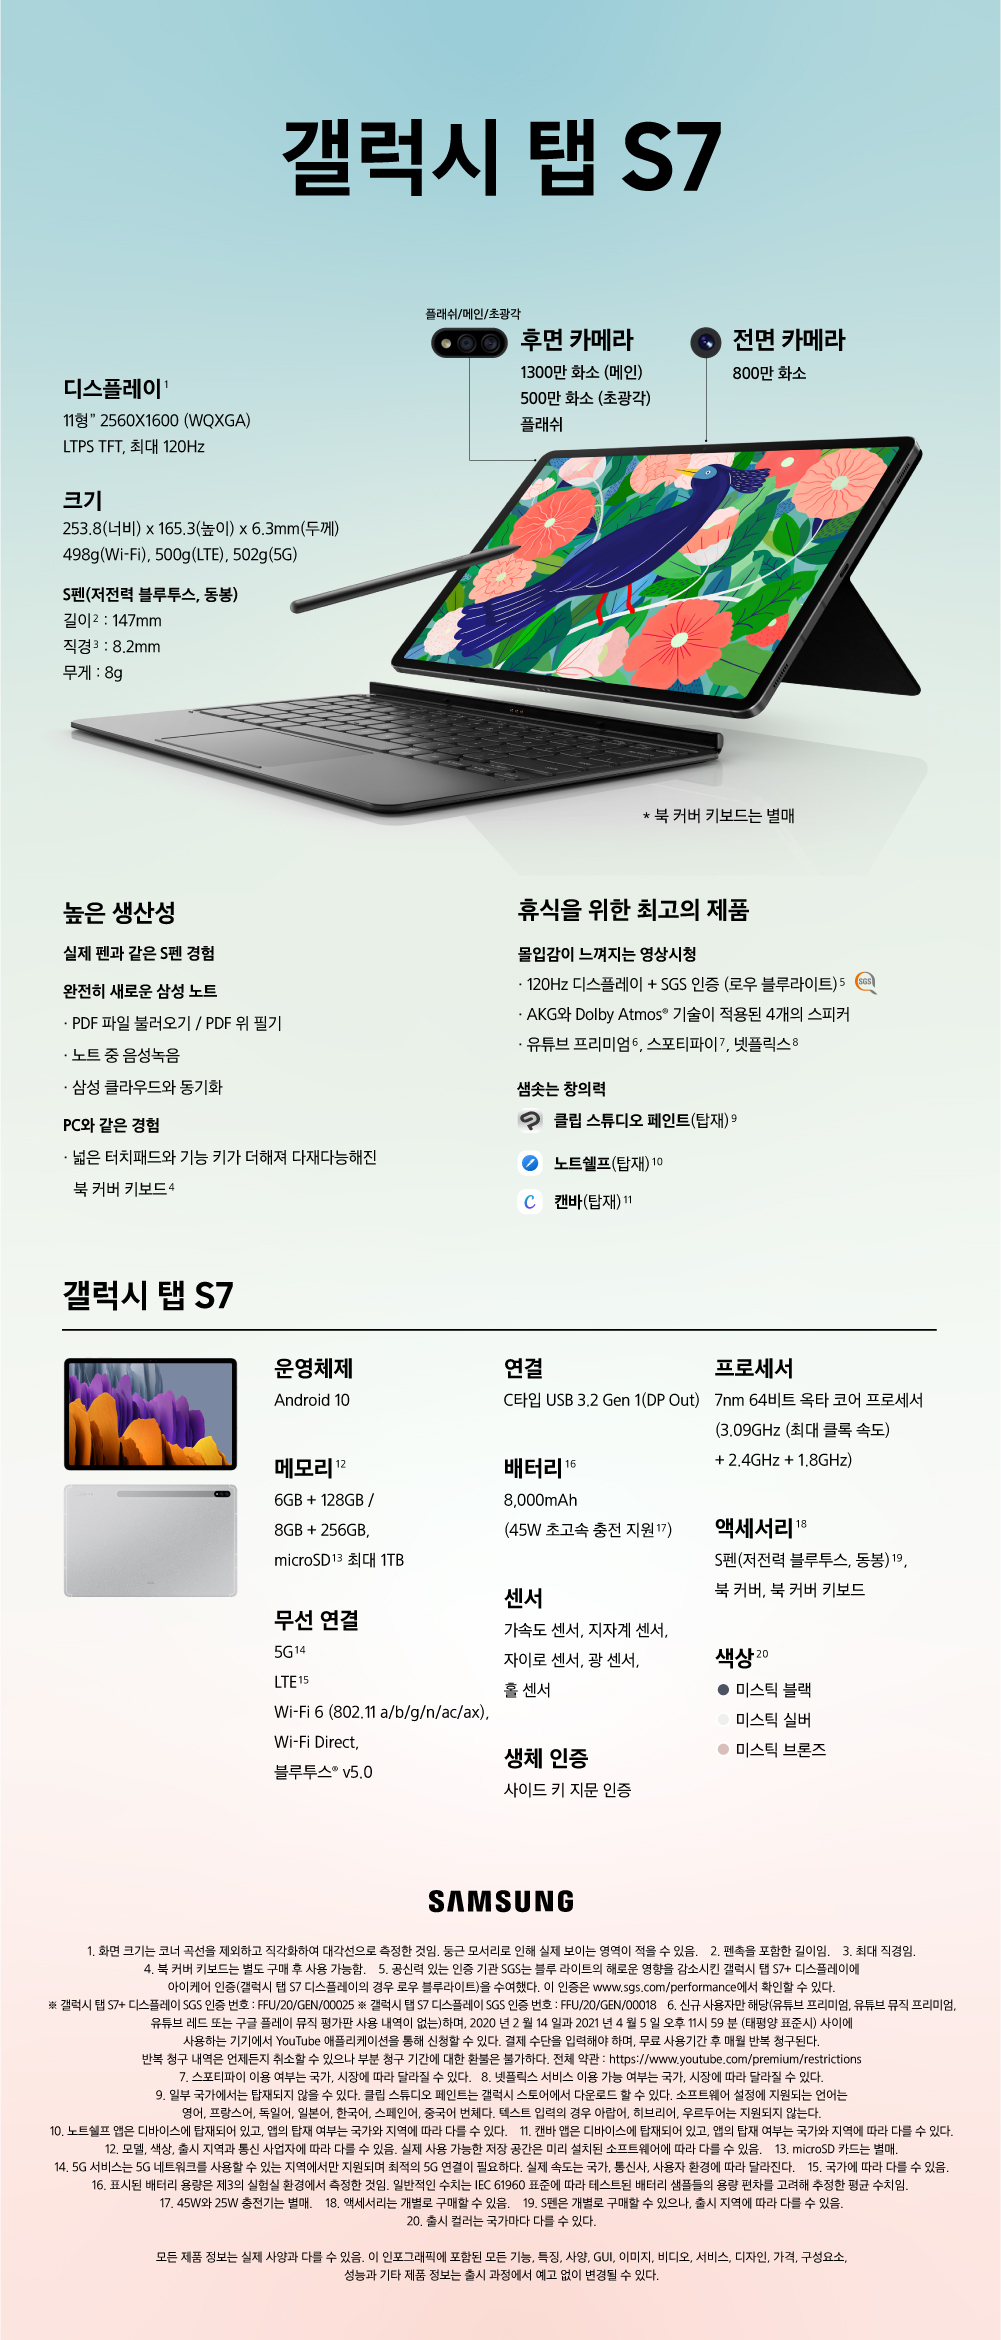 Galaxy_Tab_S7_Product_Specifications_KR-new-2.jpg